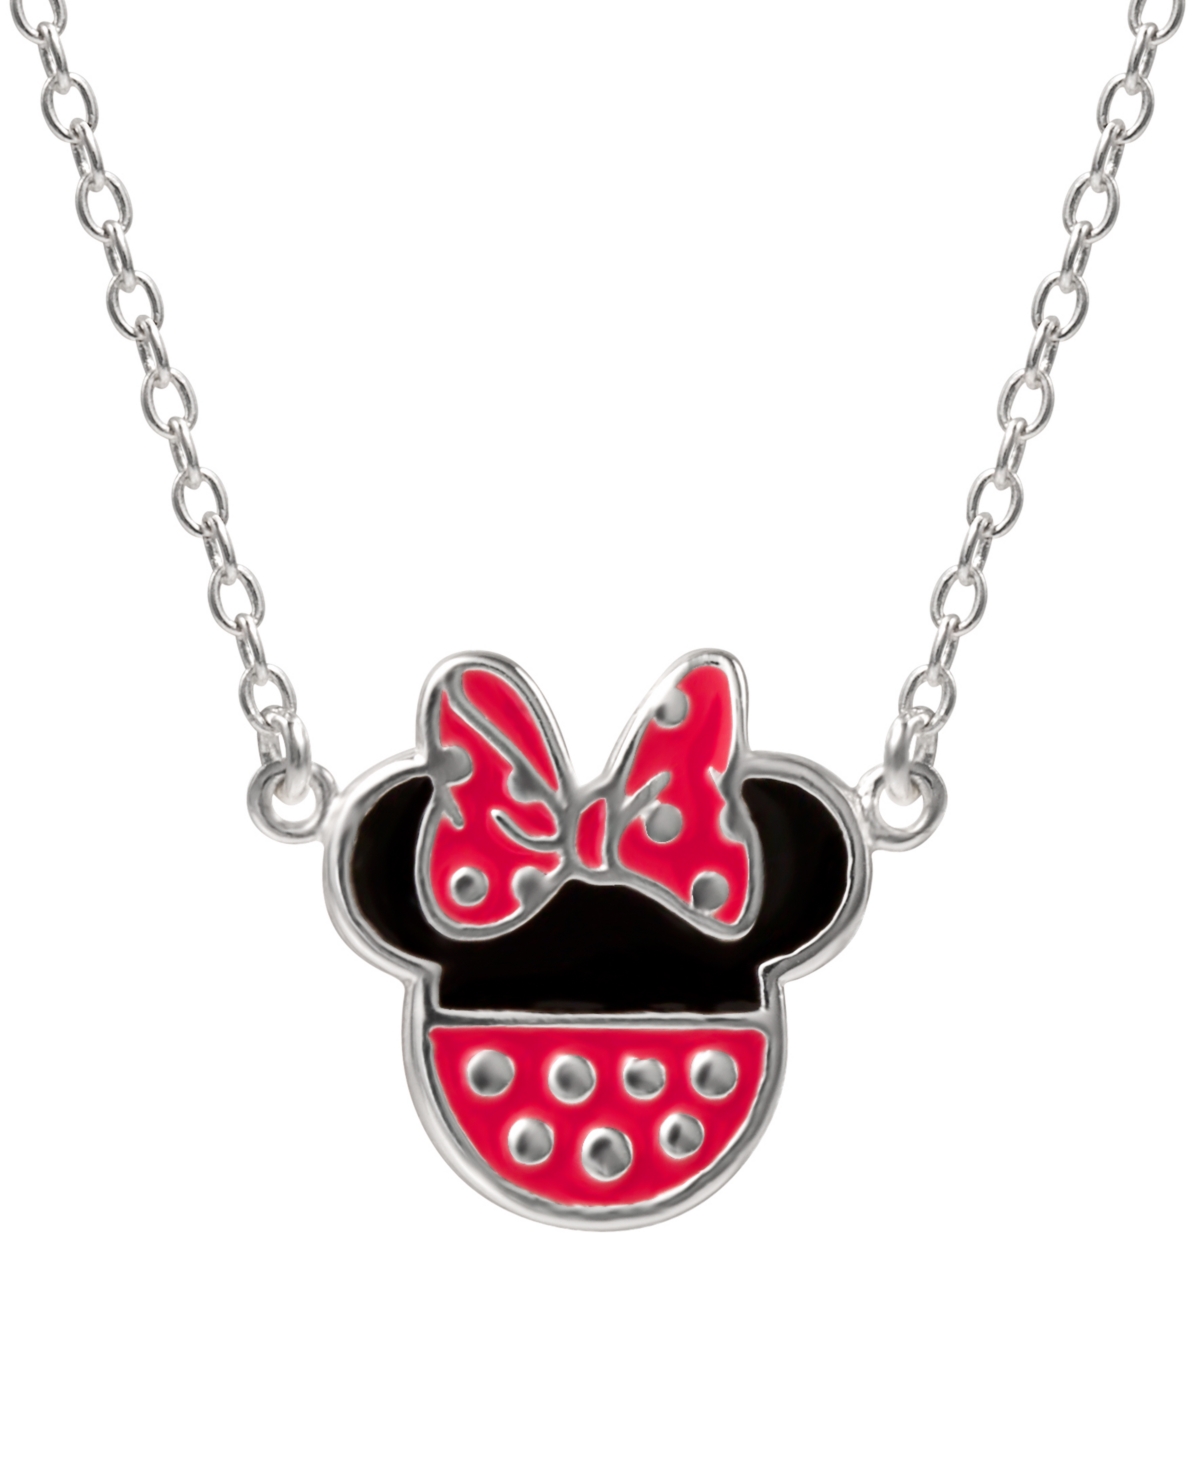 Minnie Mouse Enamel Pendant Necklace in Sterling Silver, 16" + 2" extender - Sterling Silver